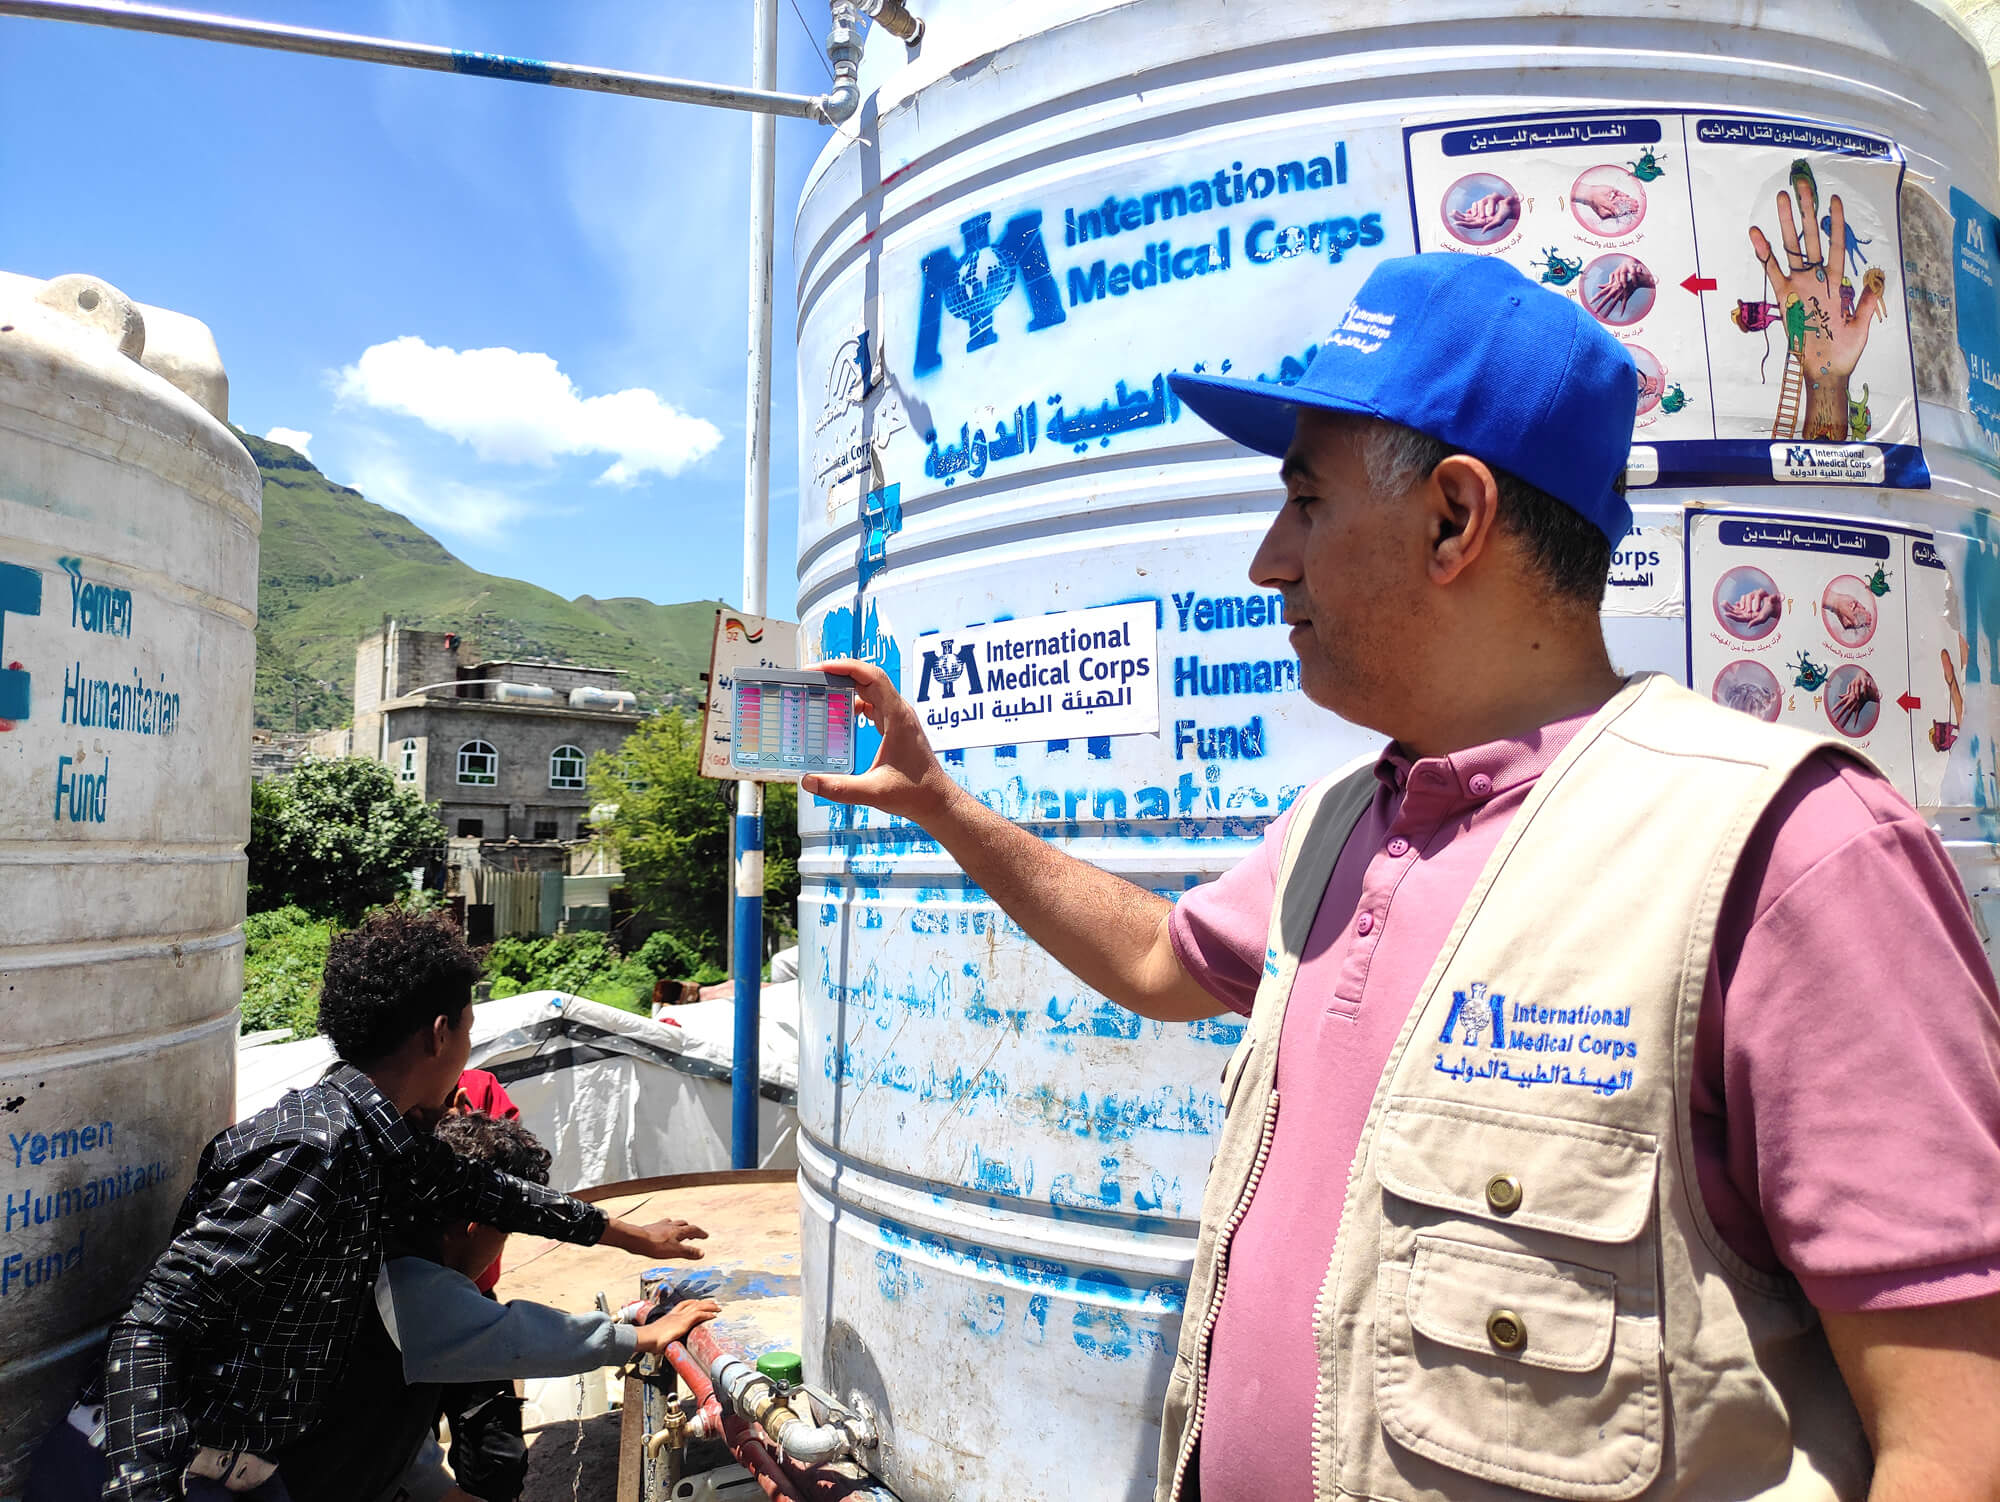 Esmail measures the chlorine level of a water point in an IDP camp to make sure the water is safe to drink.